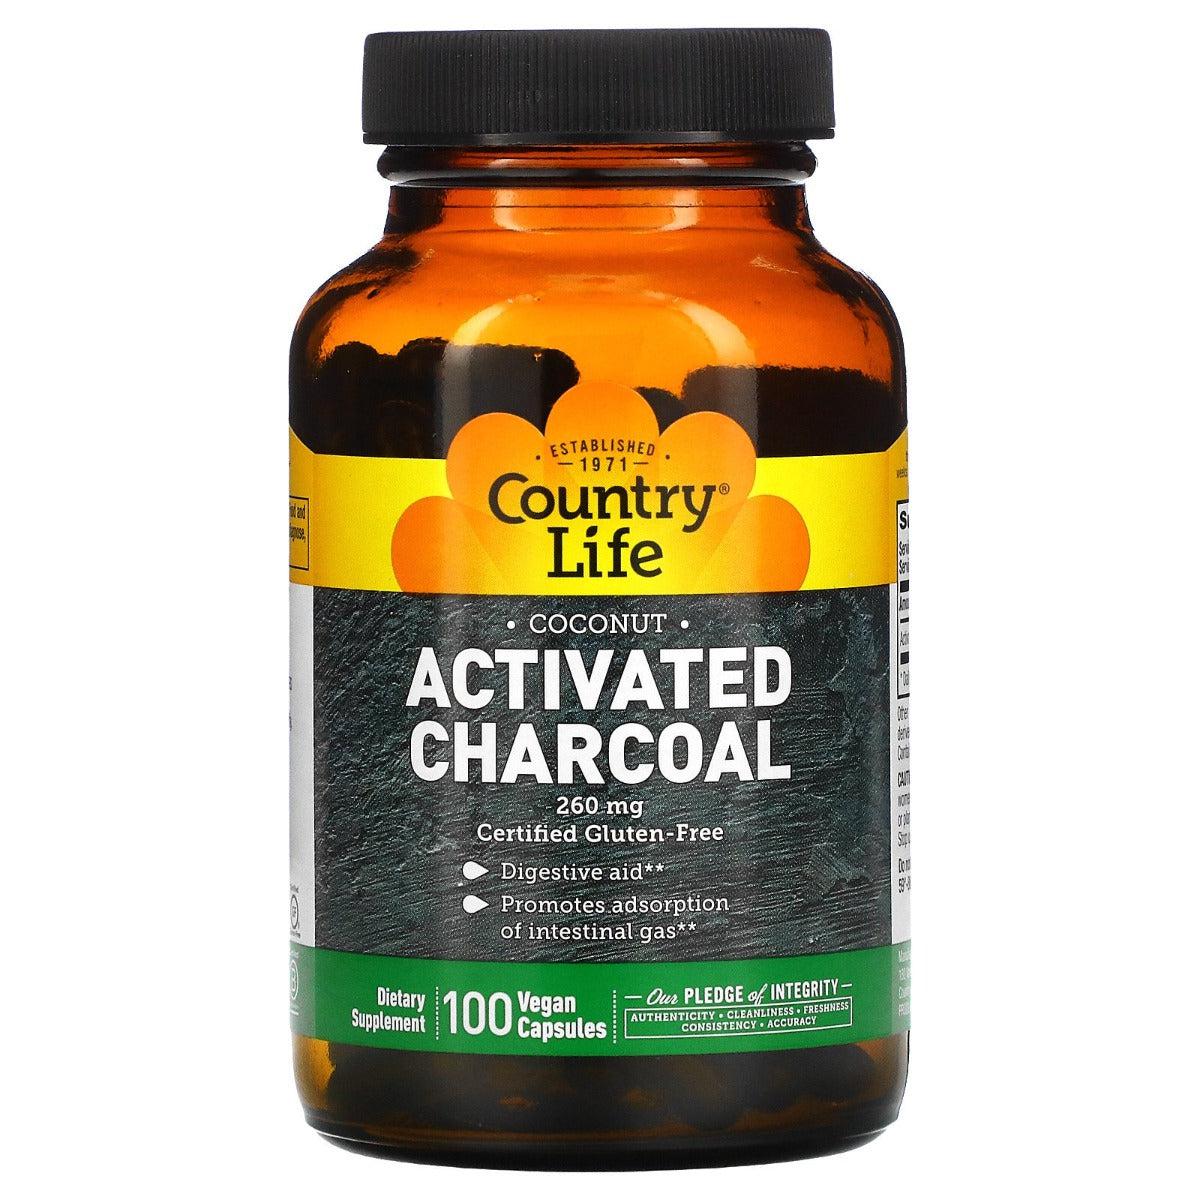 Country Life Activated Charcoal 260mg 100 Vegan Capsules